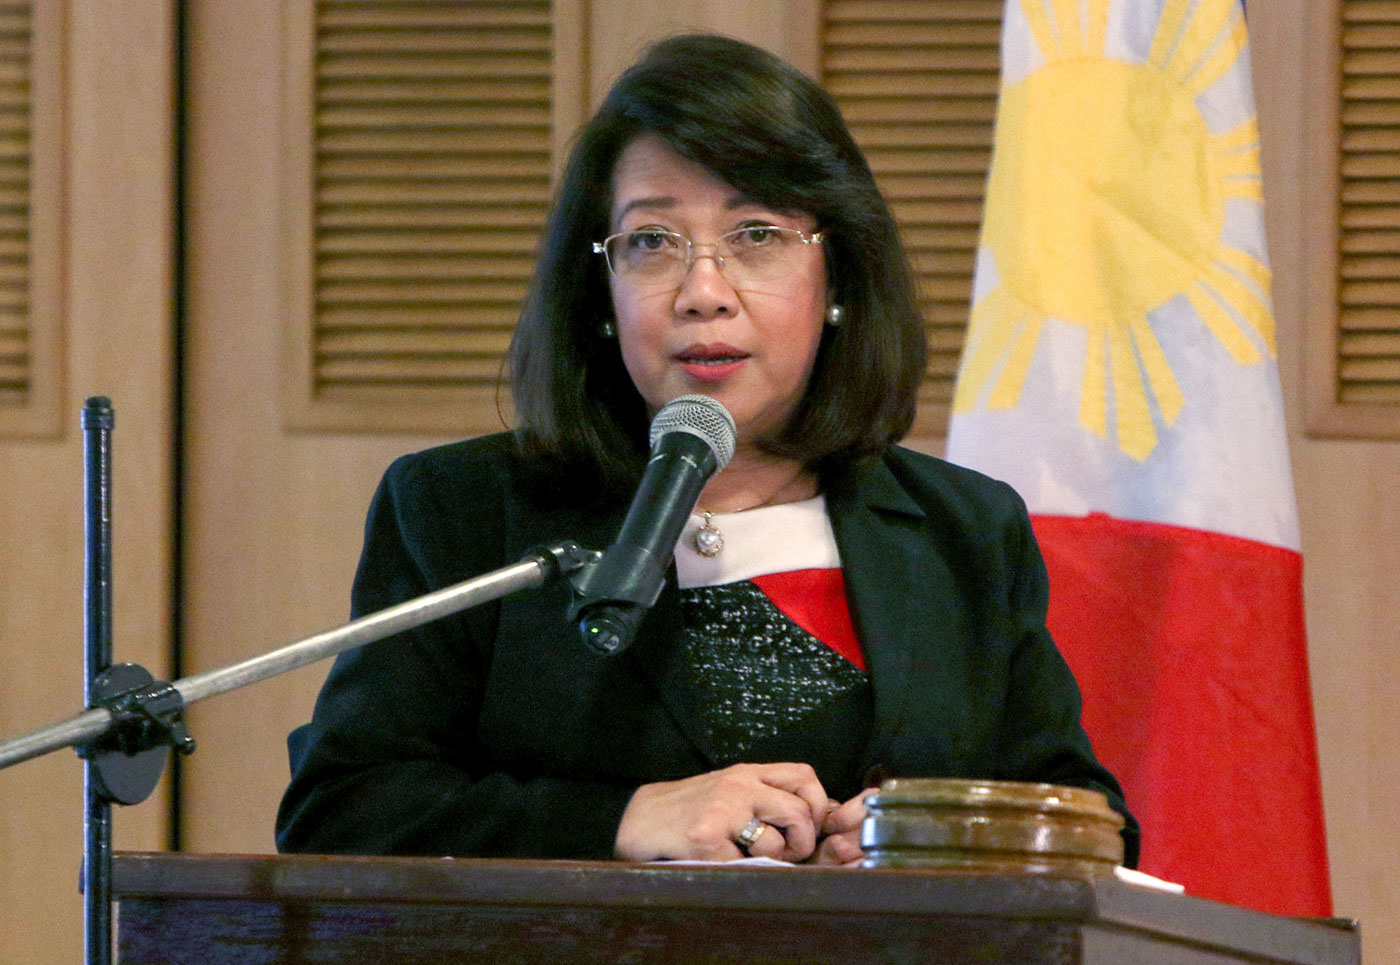 QUO WARRANTO. Chief Justice Maria Lourdes Sereno awaits a decision from the Supreme Court on the unprecedented quo warranto petition to oust her. File photo by Inoue Jaena/Rappler 